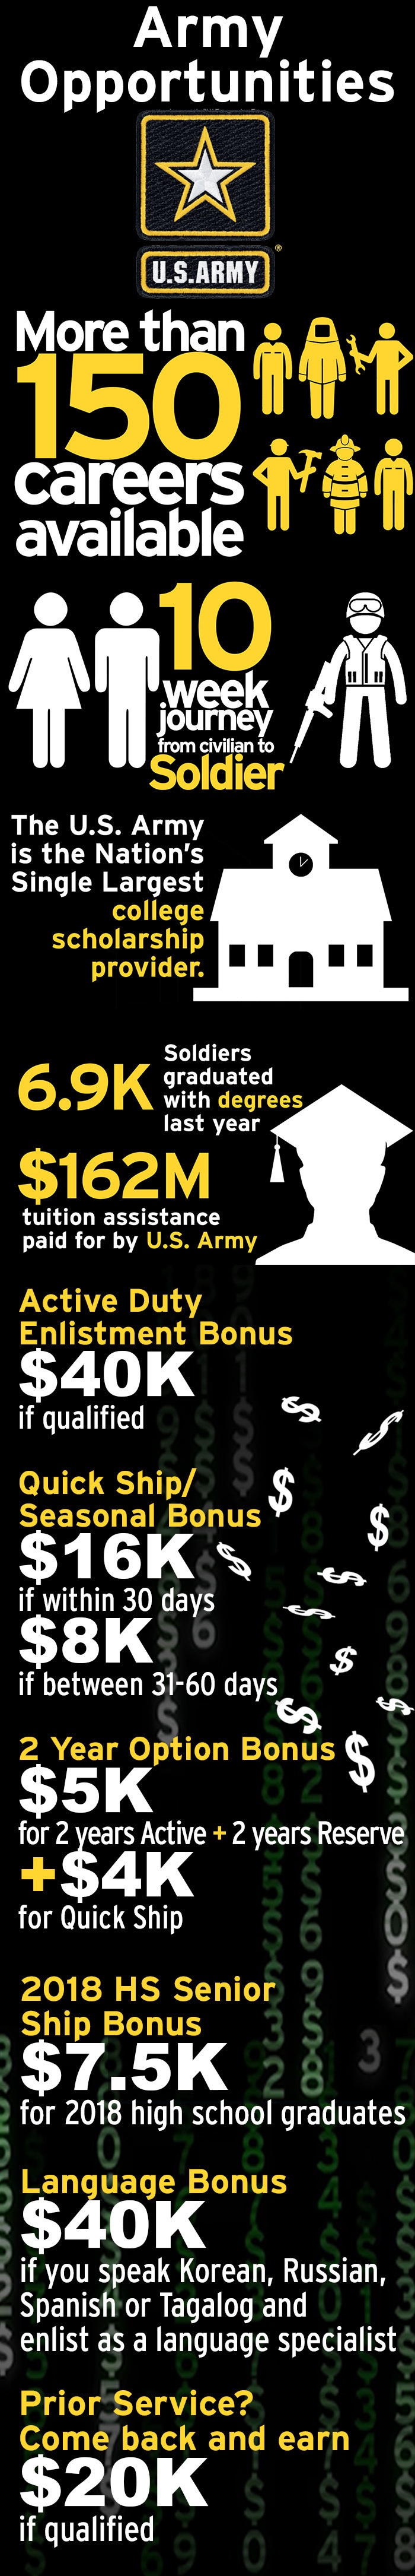 Army Opportunities Infographic